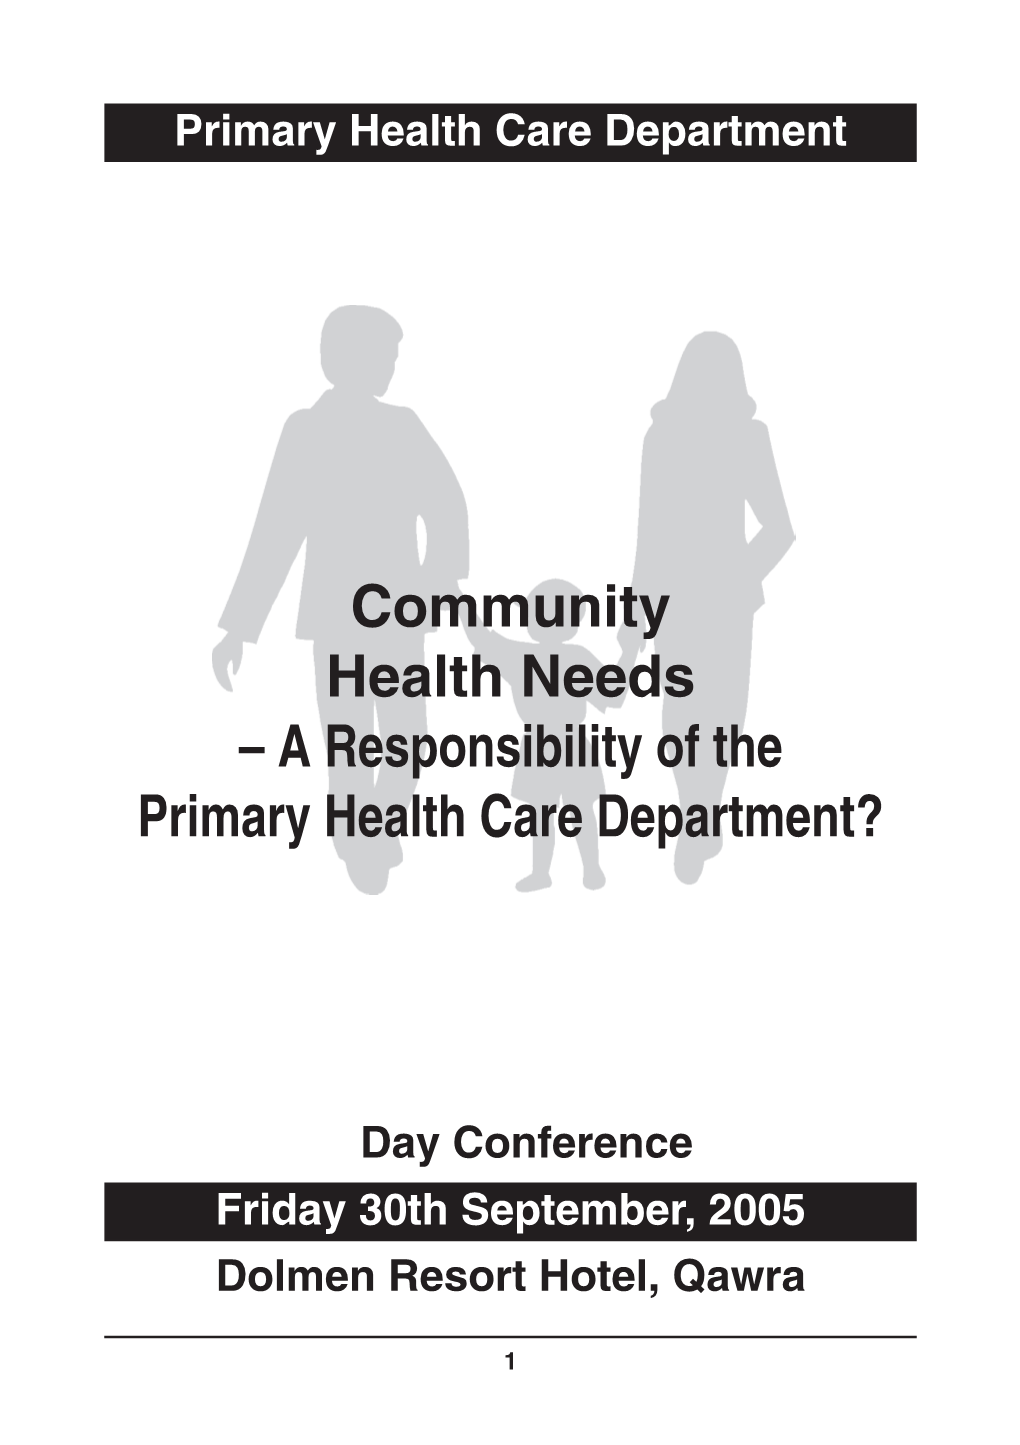 Community Health Needs – a Responsibility of the Primary Health Care Department?